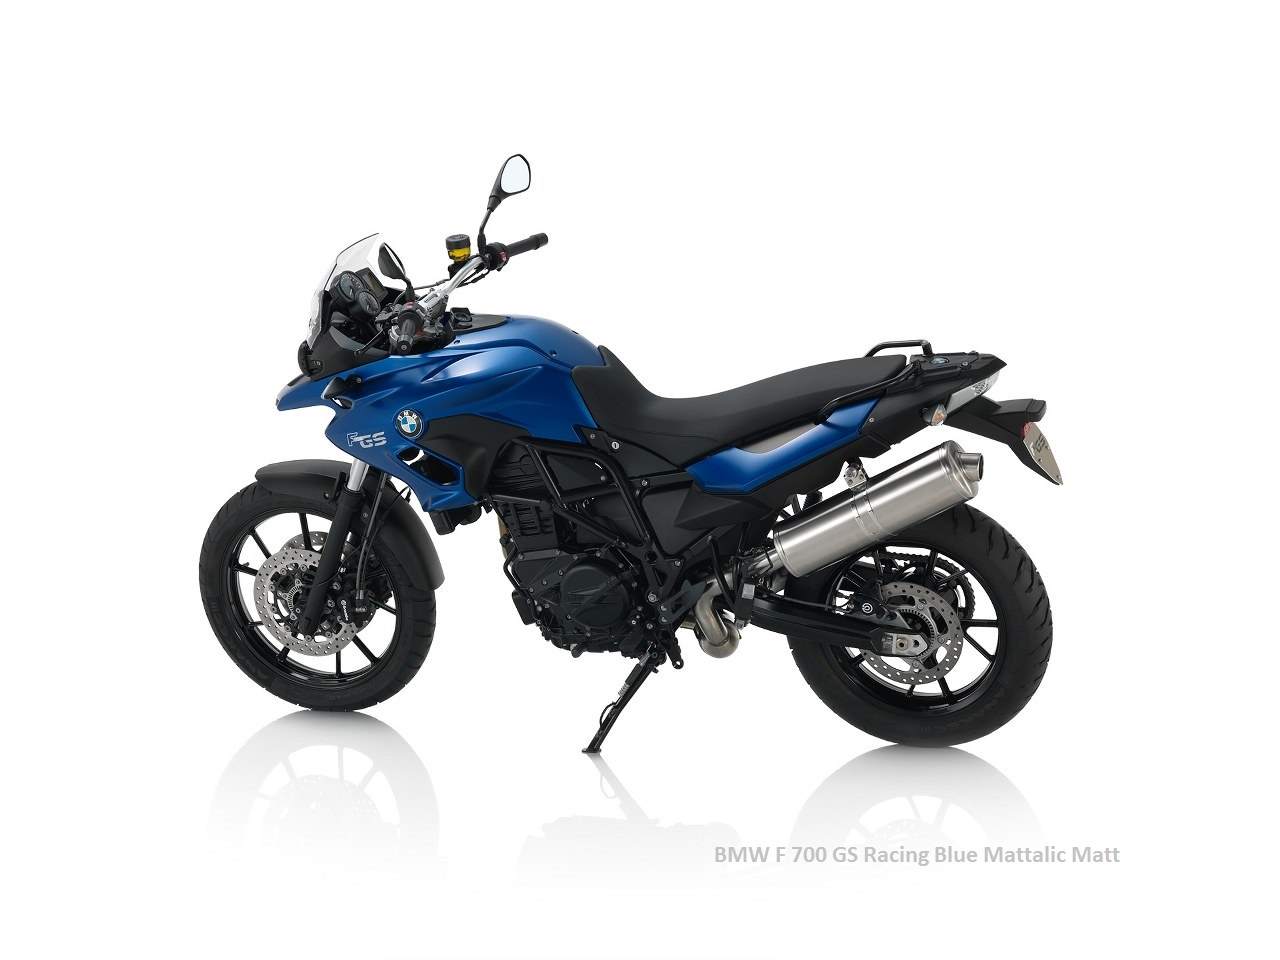 BMW F 700 GS the Best Motorcycles in the World